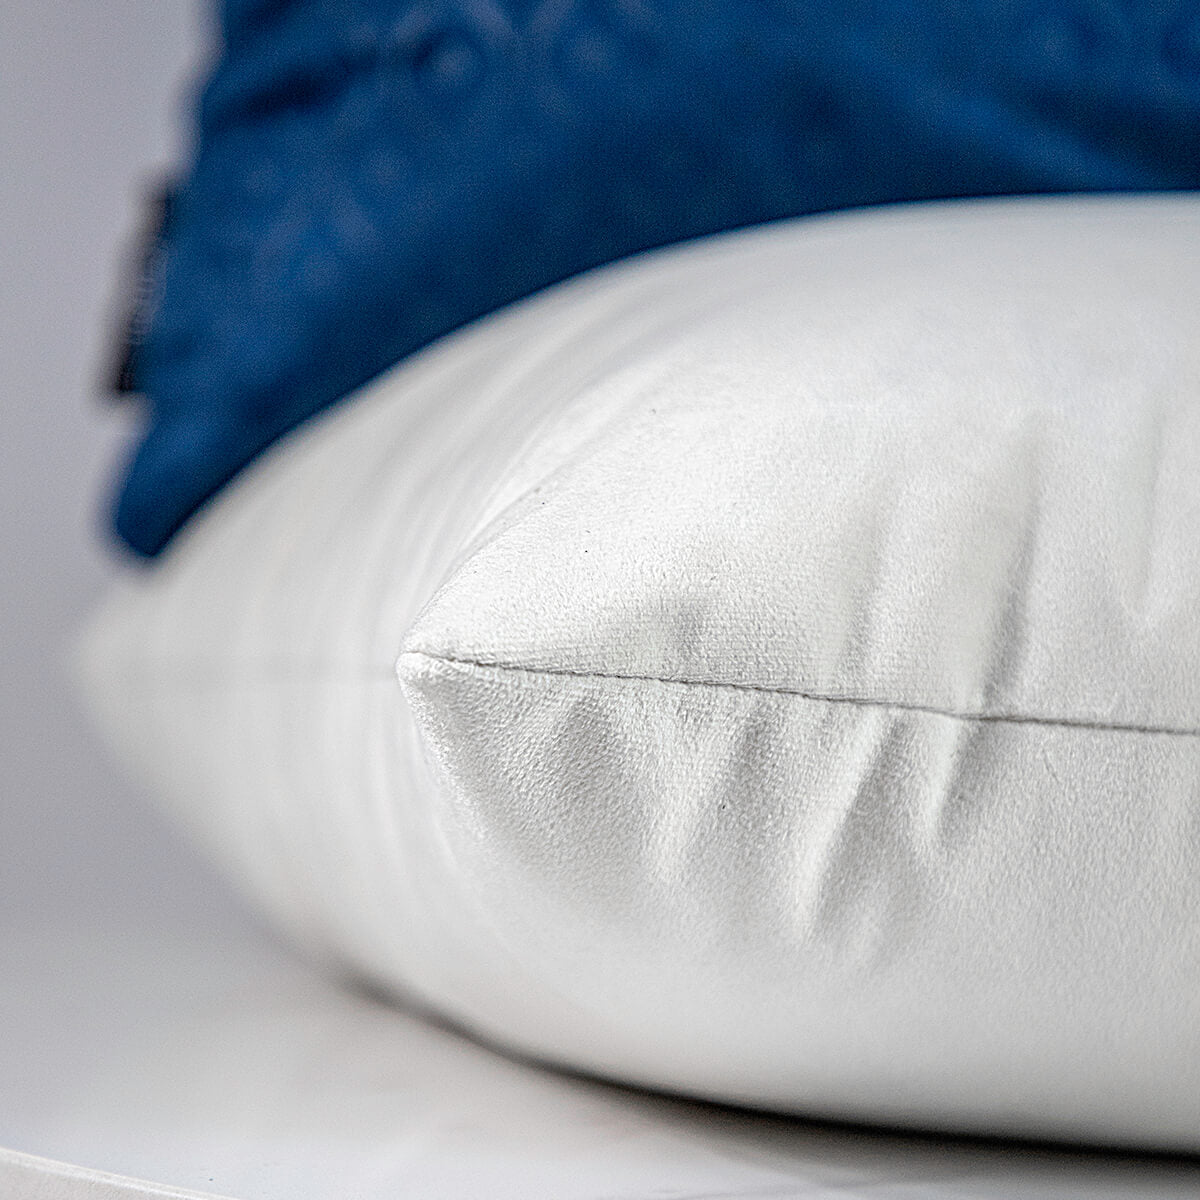 Sophie - Sustainable Down Alternative Pillows